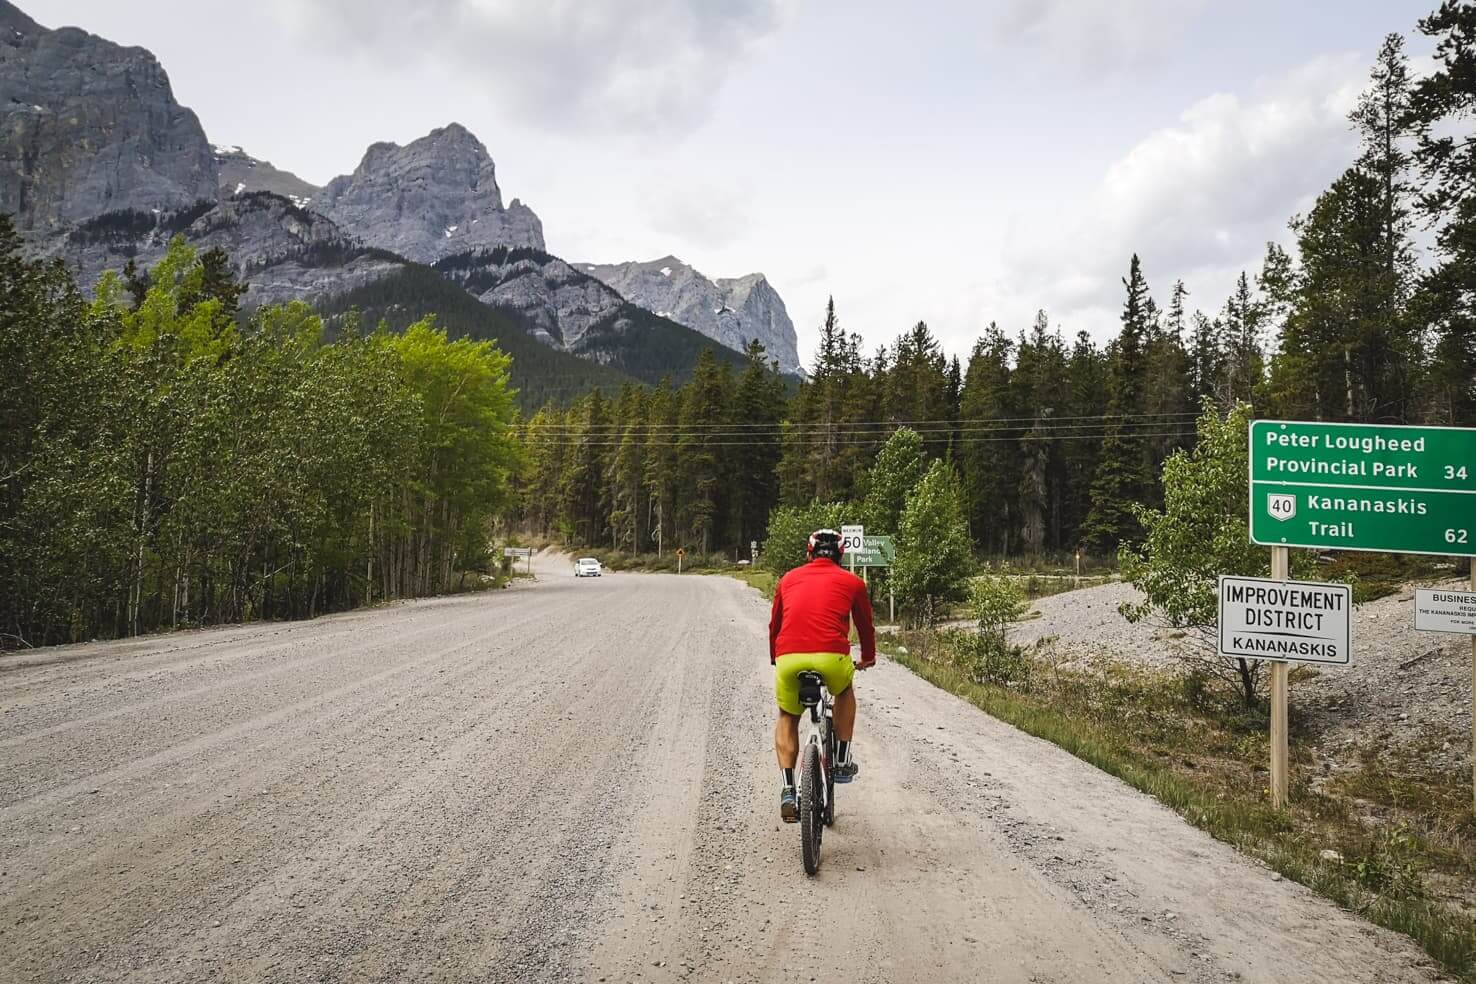 Legacy trail, biking from Banff to Canmore with an adventurous twist